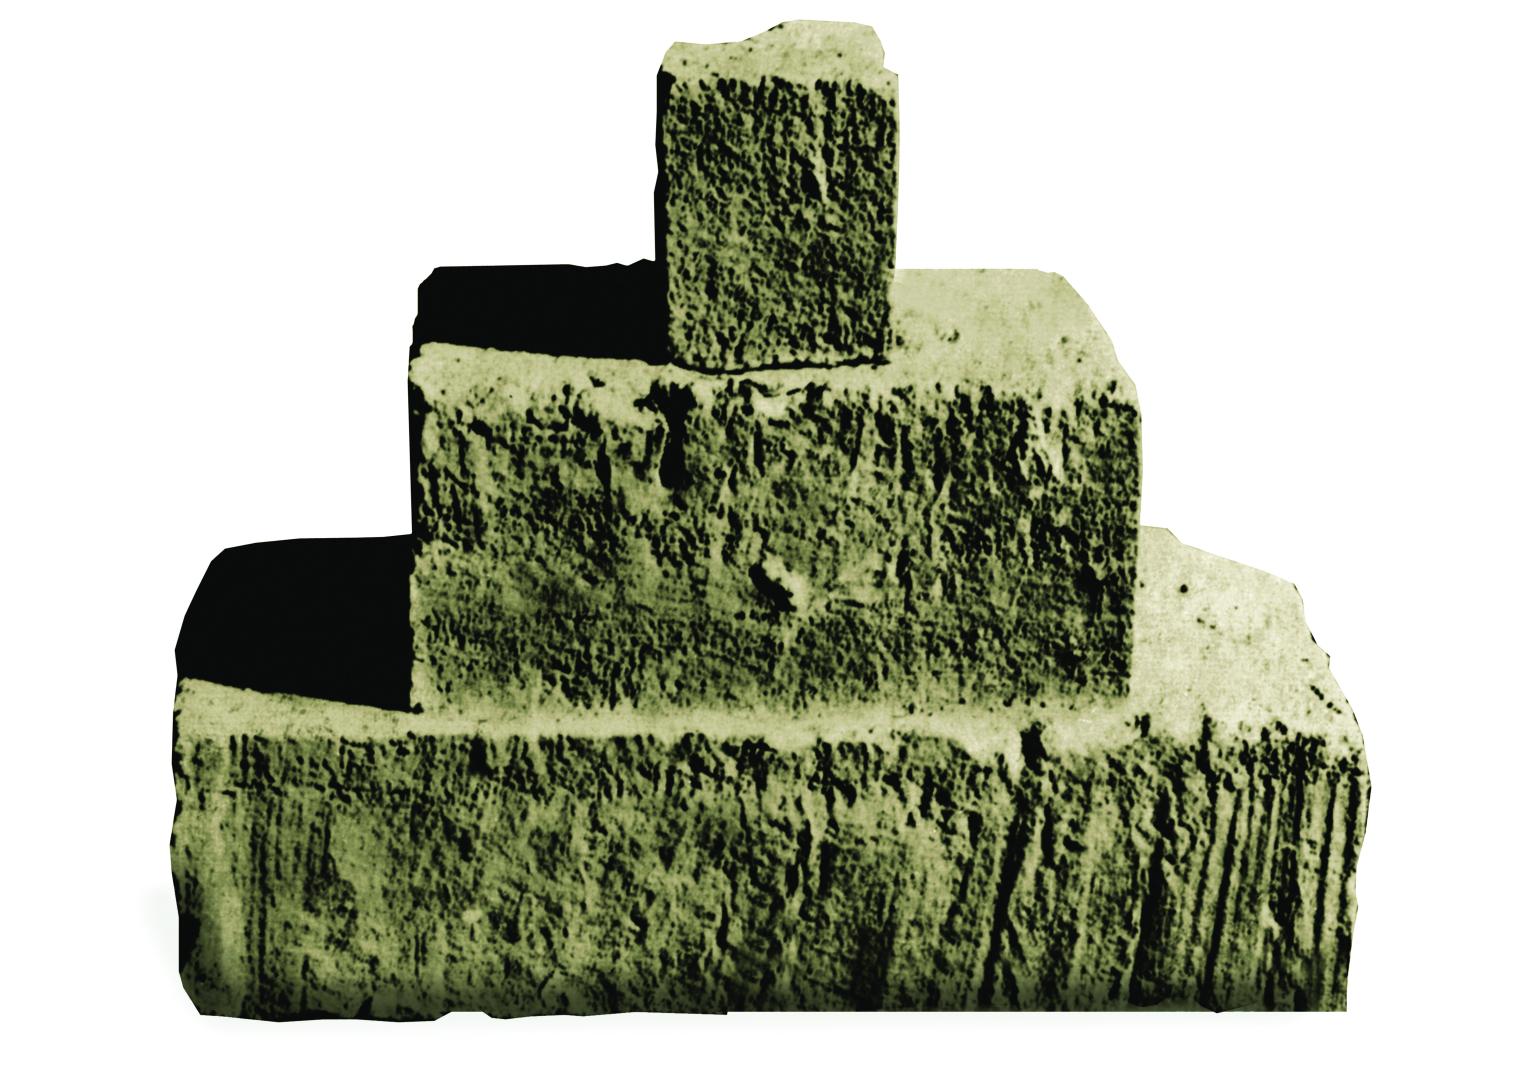 Computer reconstruction of stone crenellations with three stacked stone blocks.